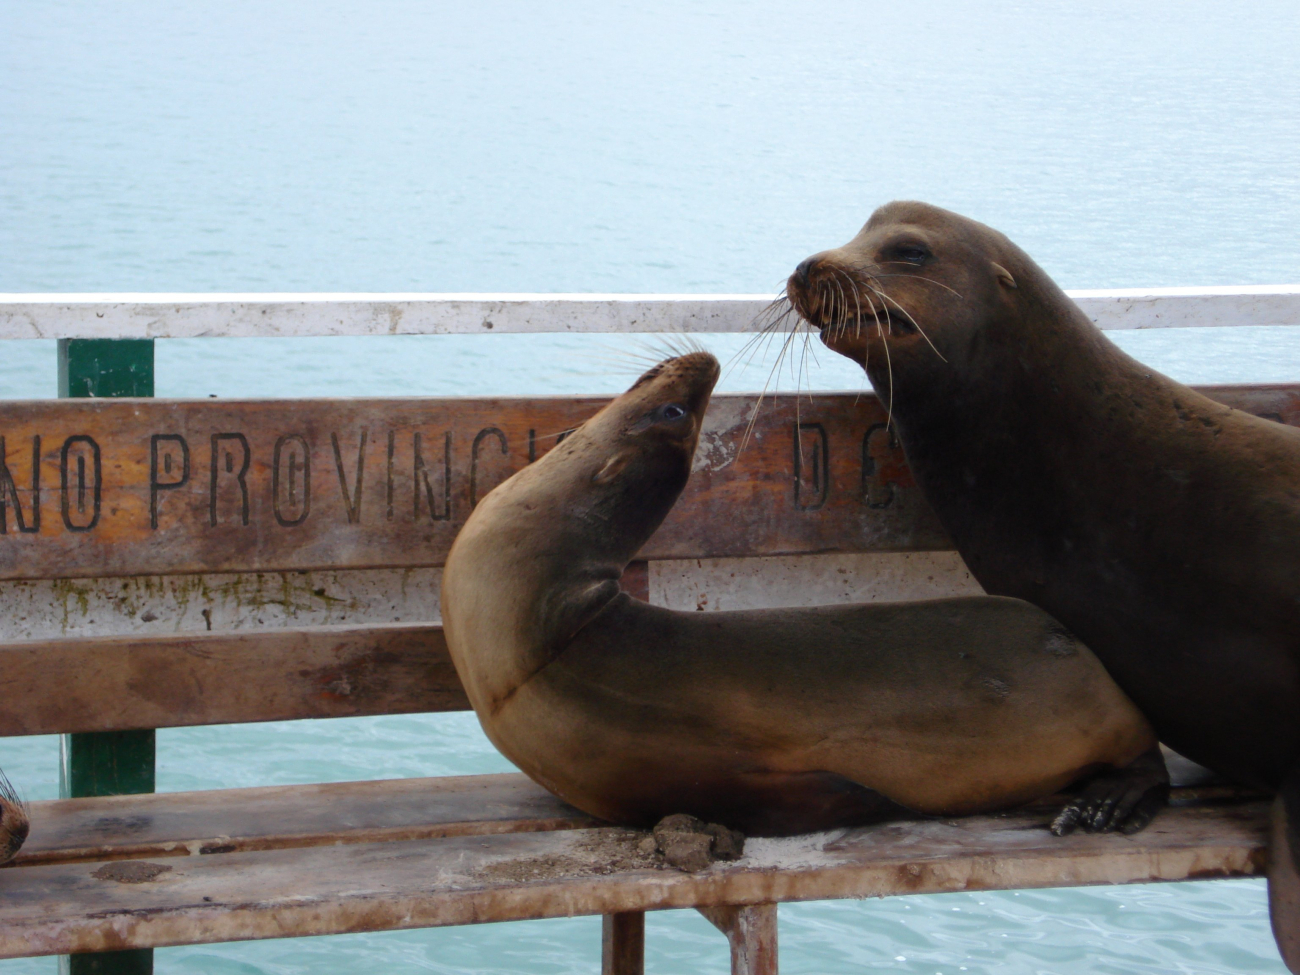 Sea lions on bench